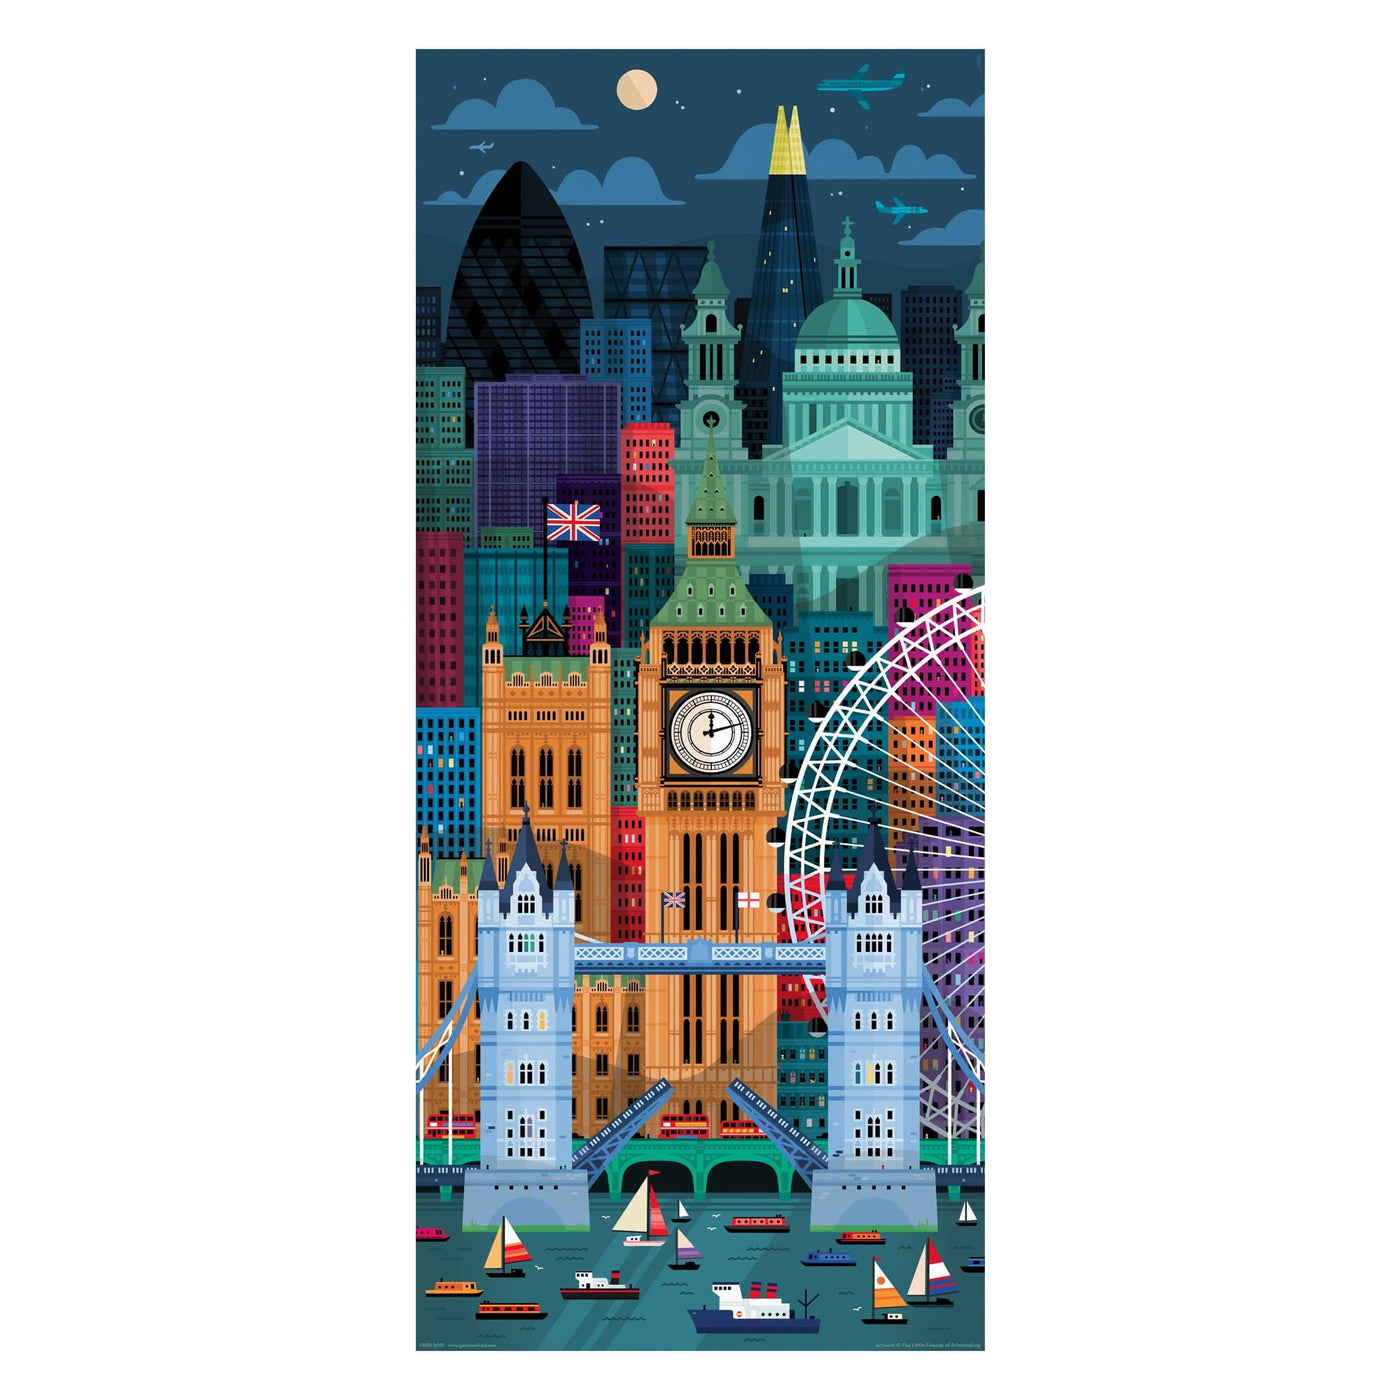 London | 1,000 Piece Jigsaw Puzzle Fred Puzzledly.